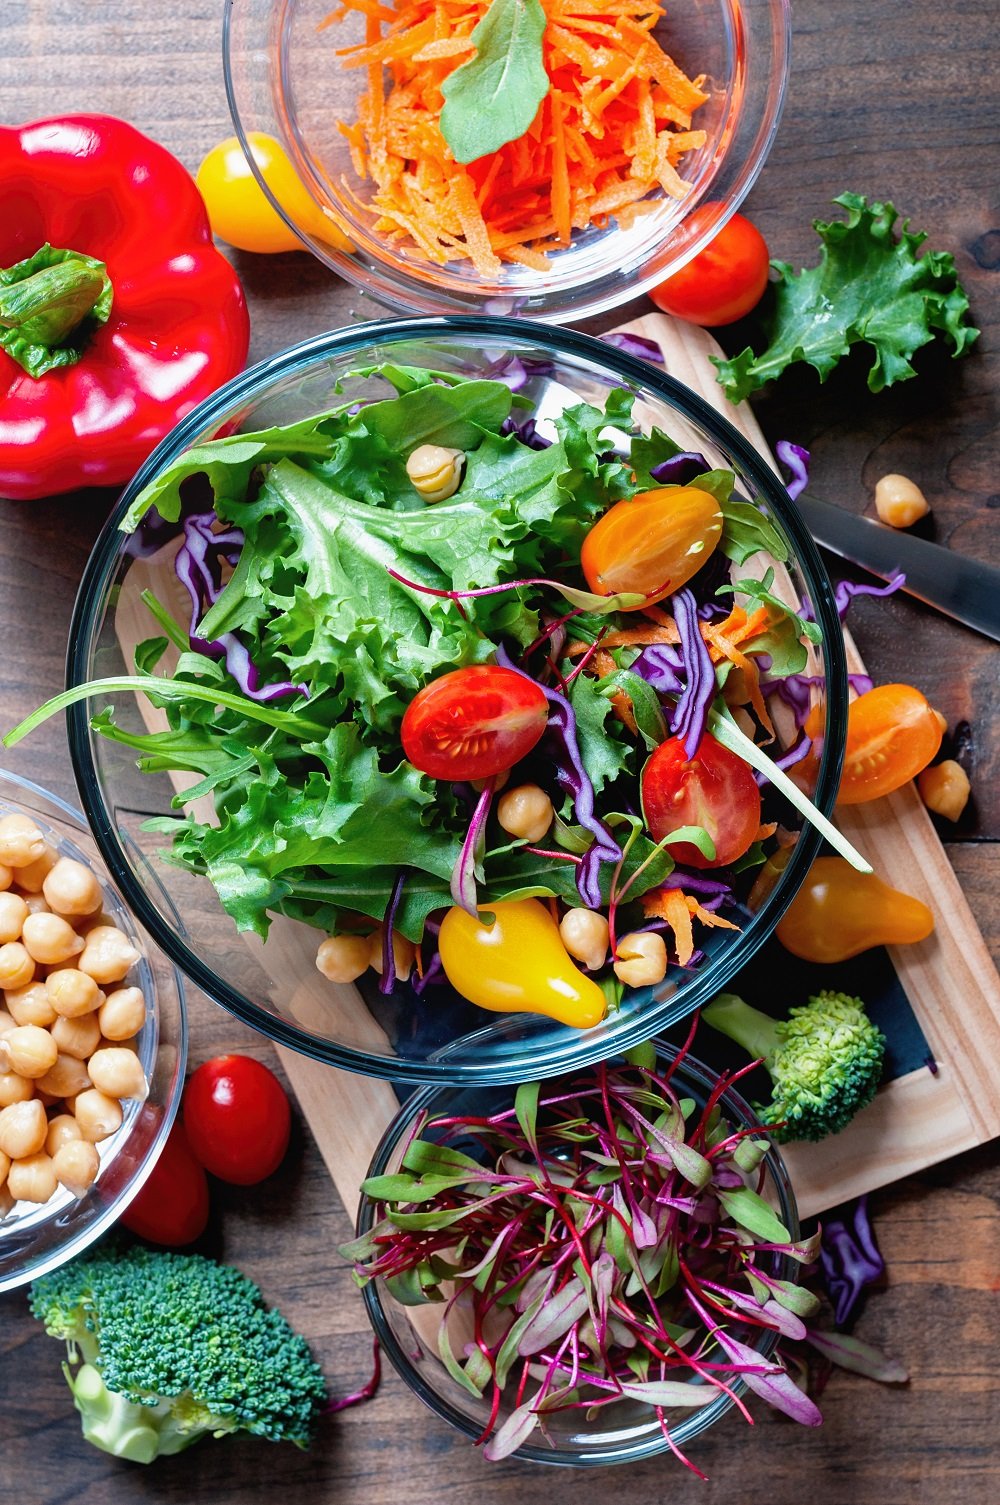 How to start a salad club at your office #healthy #lunch 